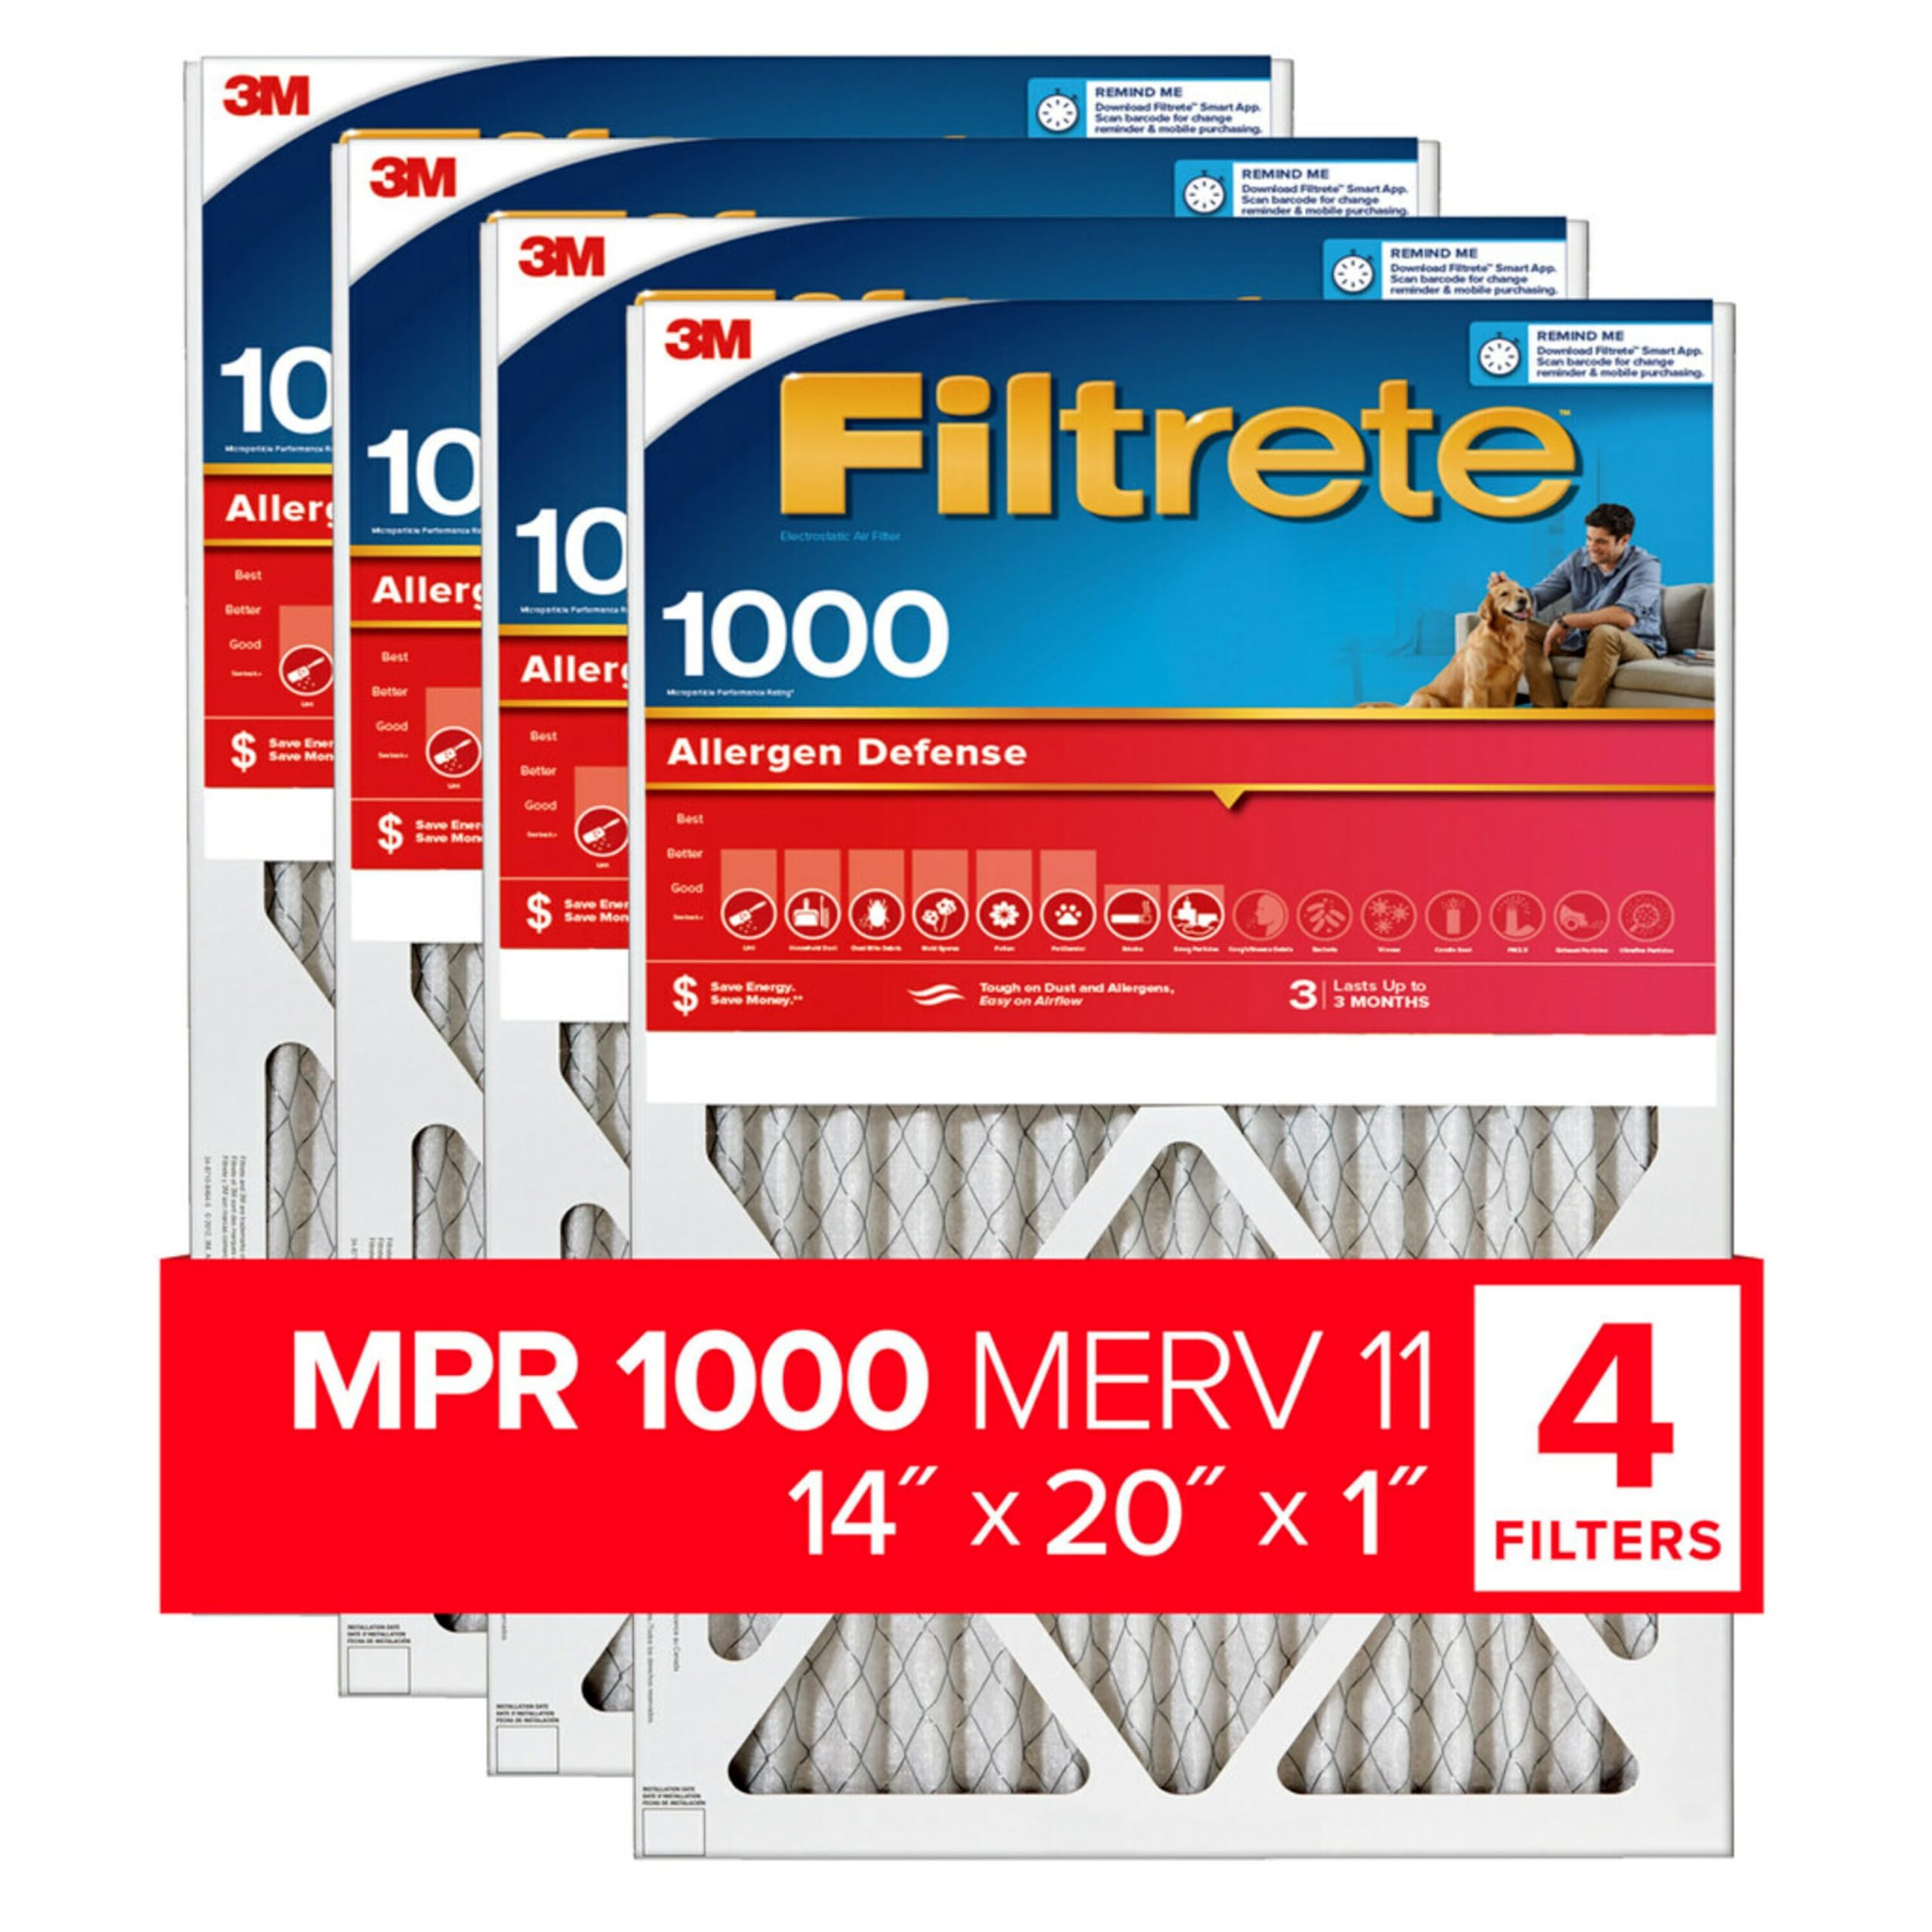 Filtrete 14x20x1 Air Filter, MPR 1000, MERV 11, Micro Allergen Defense 3-Month Pleated 1-Inch Air Filters, 4 Filters